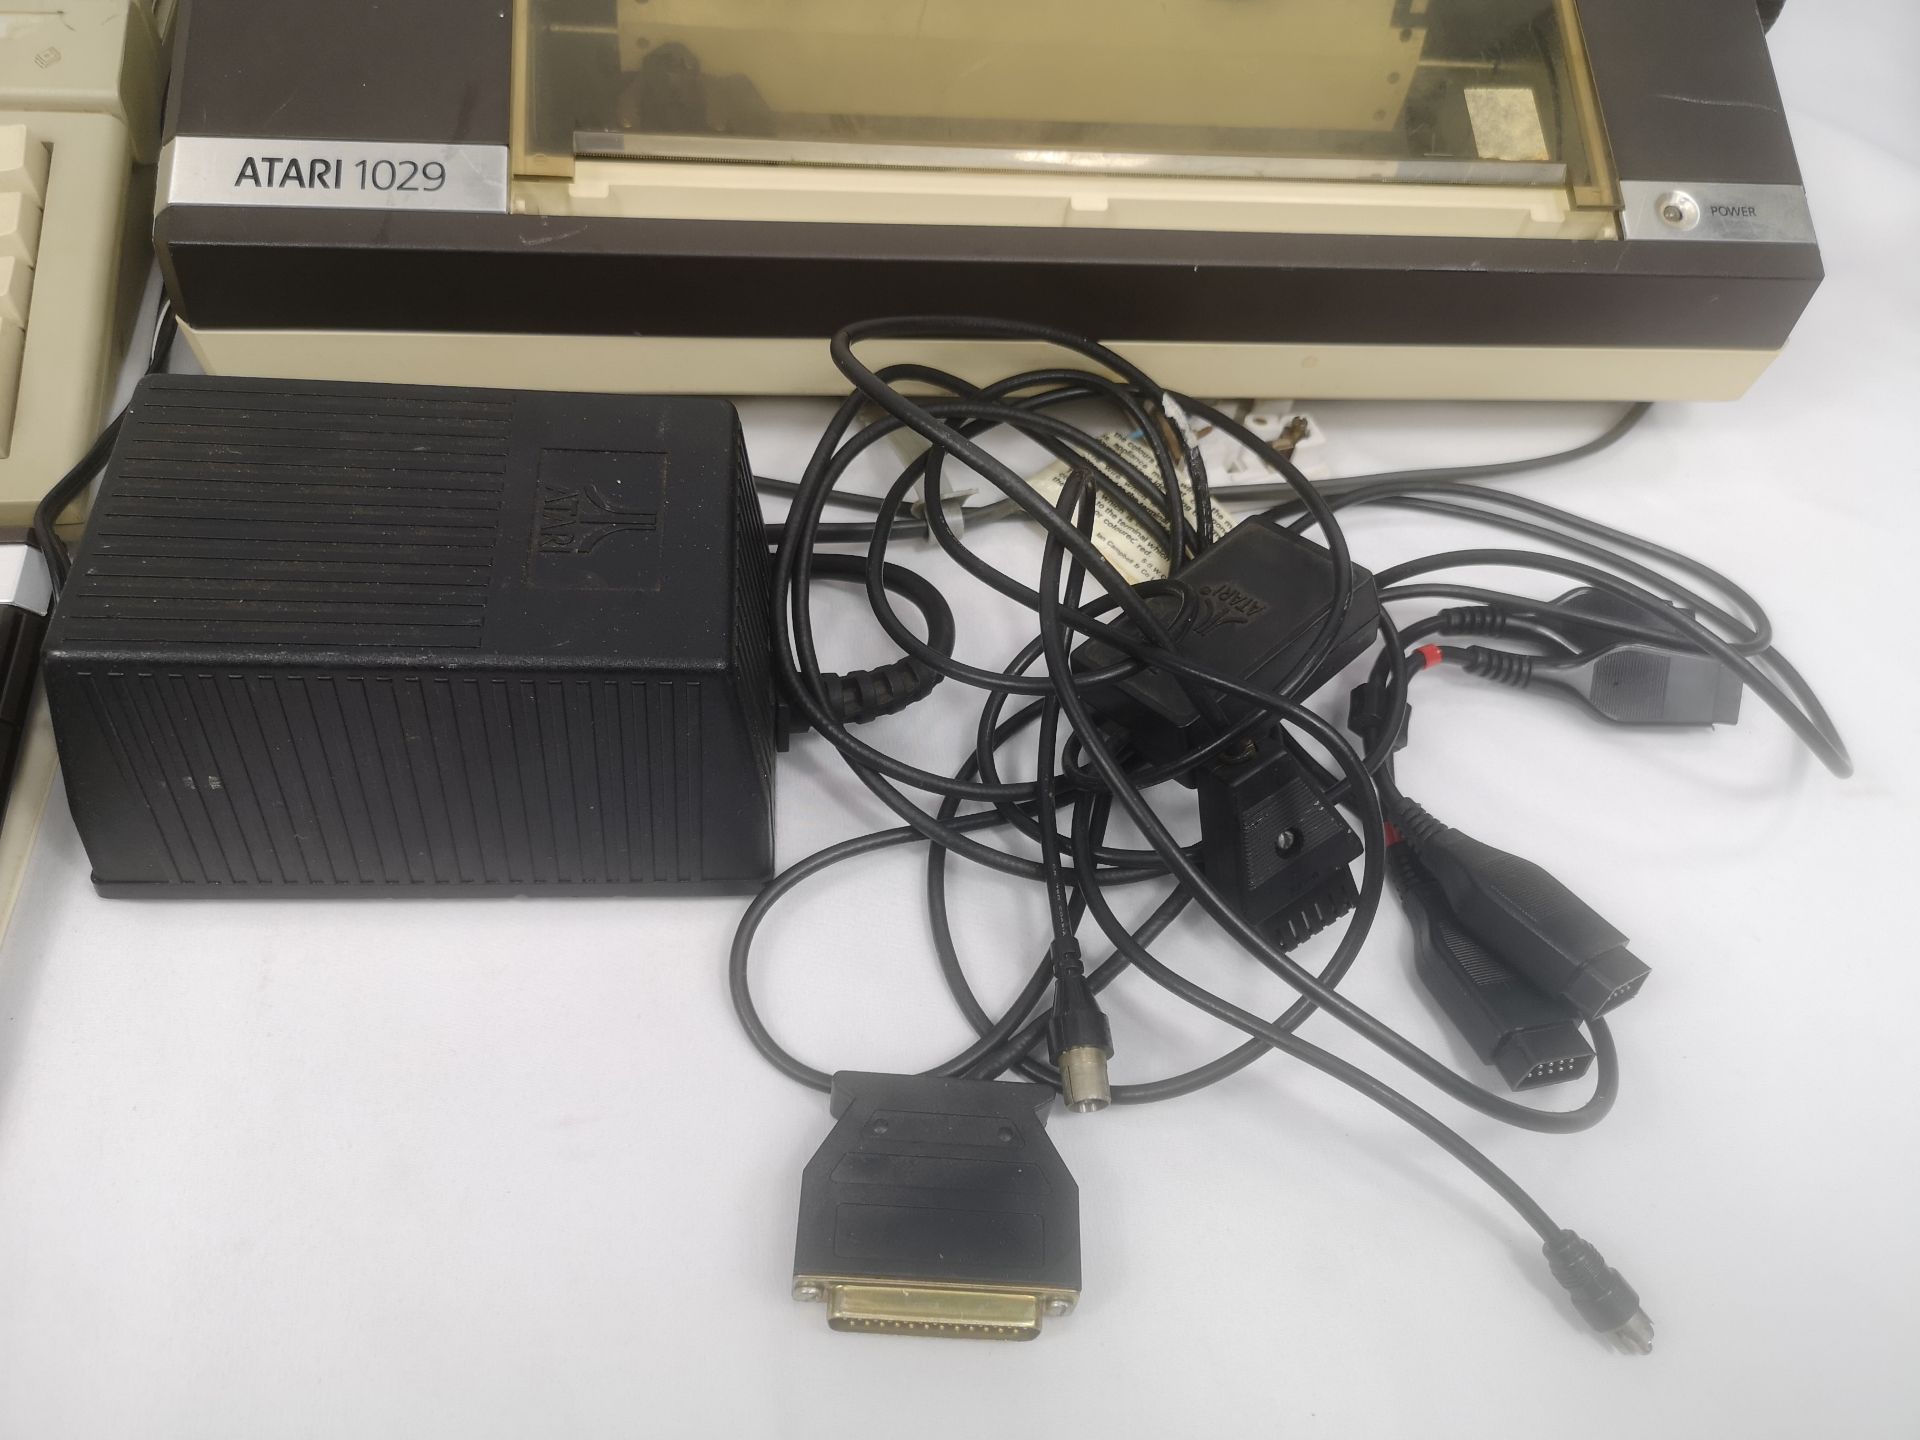 Atari 520ST computer together with accessories - Image 5 of 5